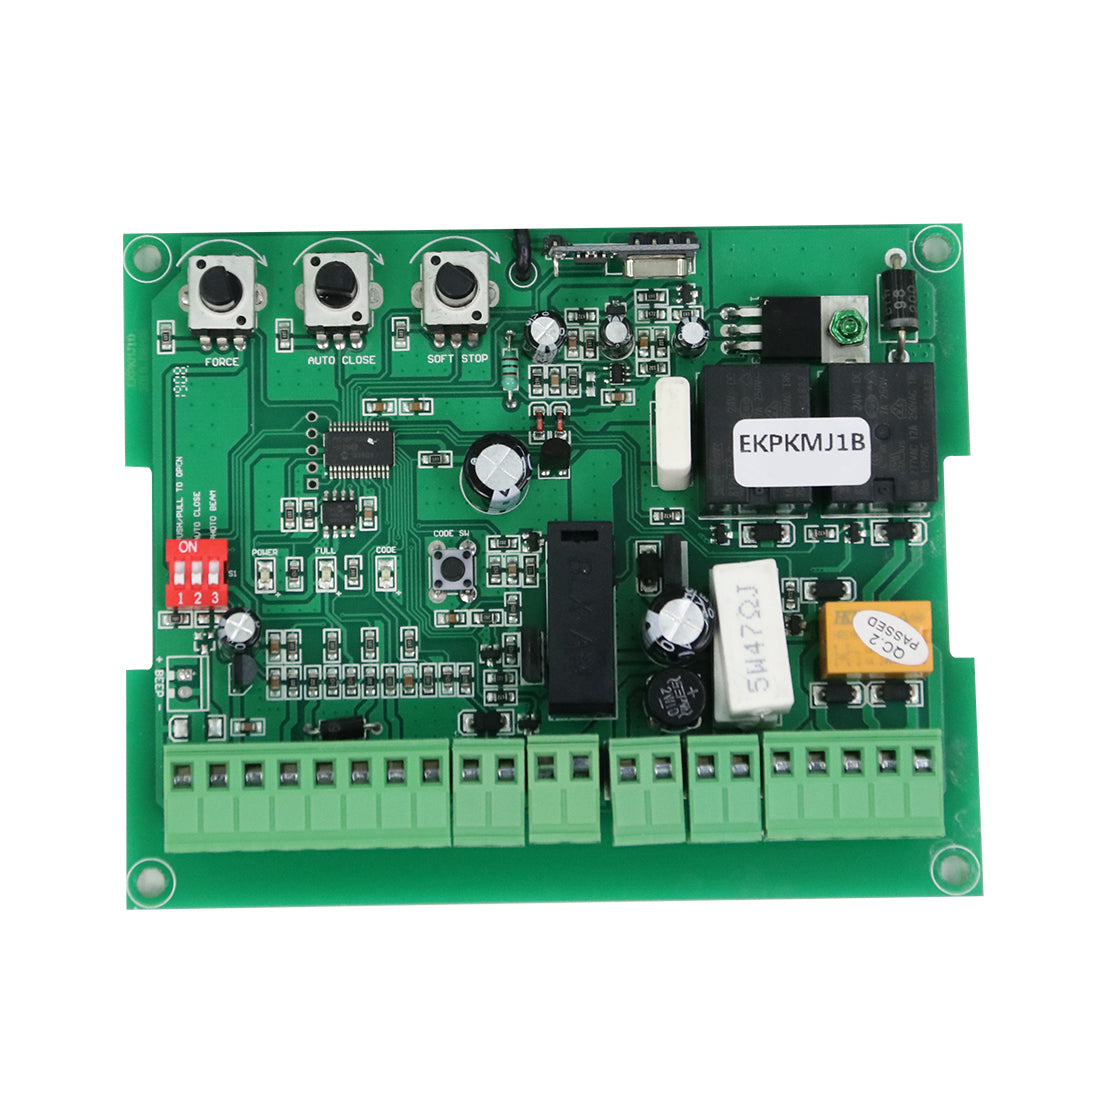 EKPKMJ1B PCB Print Circuit Control Board for A5(S) A8(S) A5131 A8131 AT6131(S) AT12131(S) Swing Gate Opener